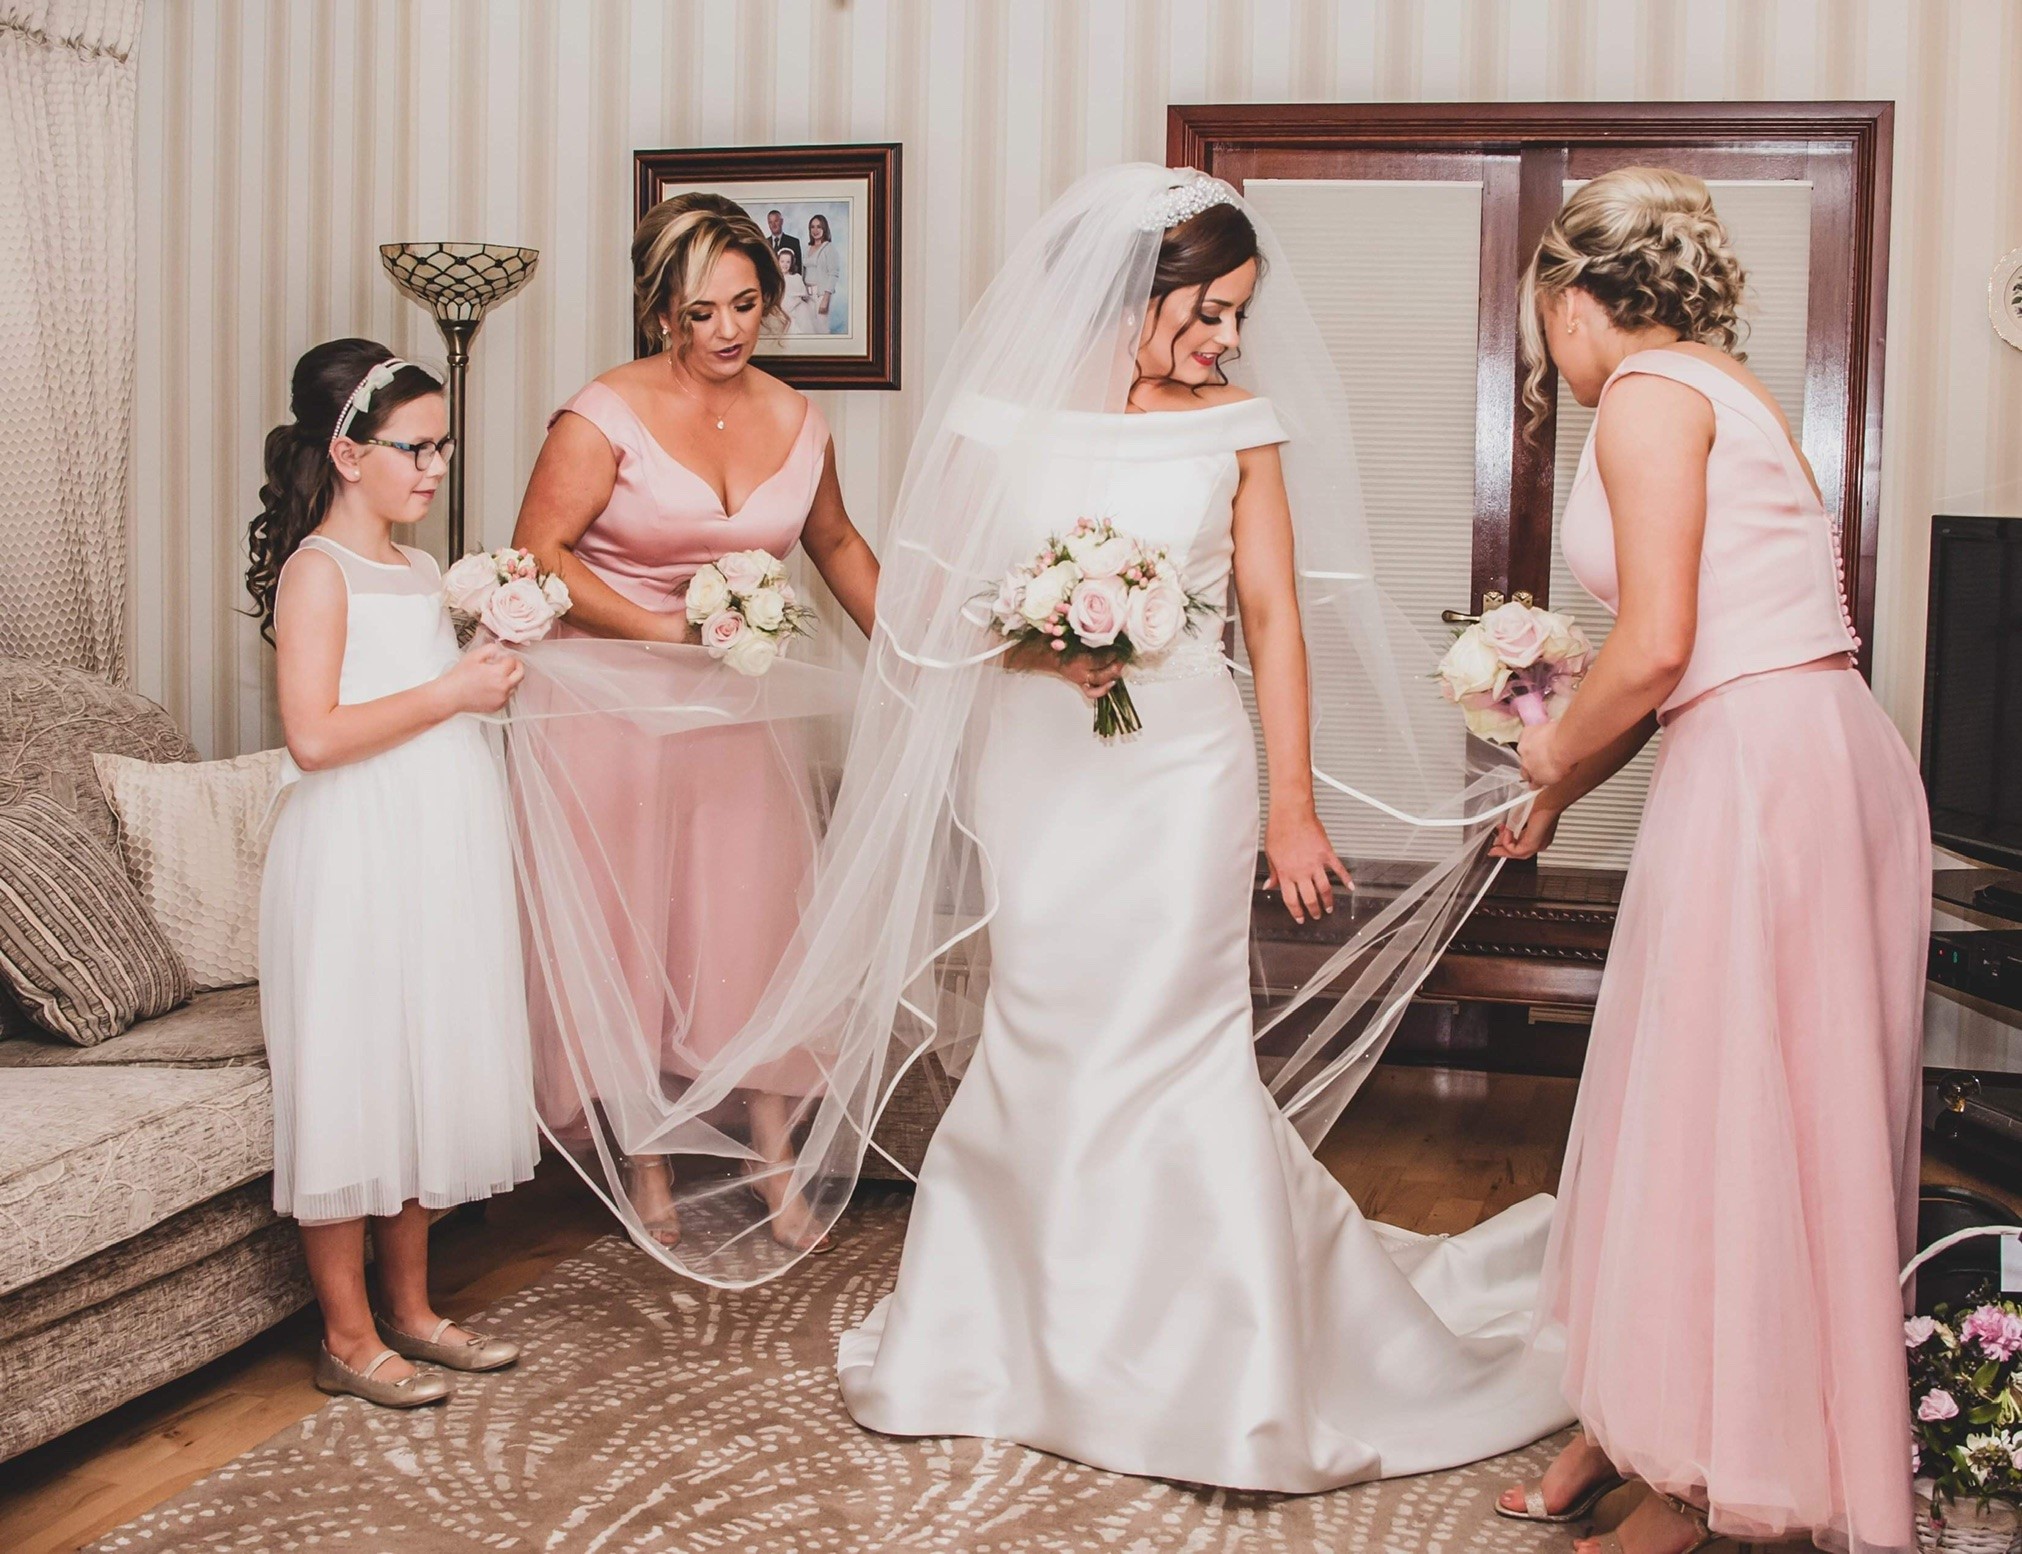 Real bride Sinead stood in a living room with two bridesmaids in pink dresses and a flower girl. Sinead wears an ivory Ronald Joyce 69153 wedding dress and a sweeping tulle veil.